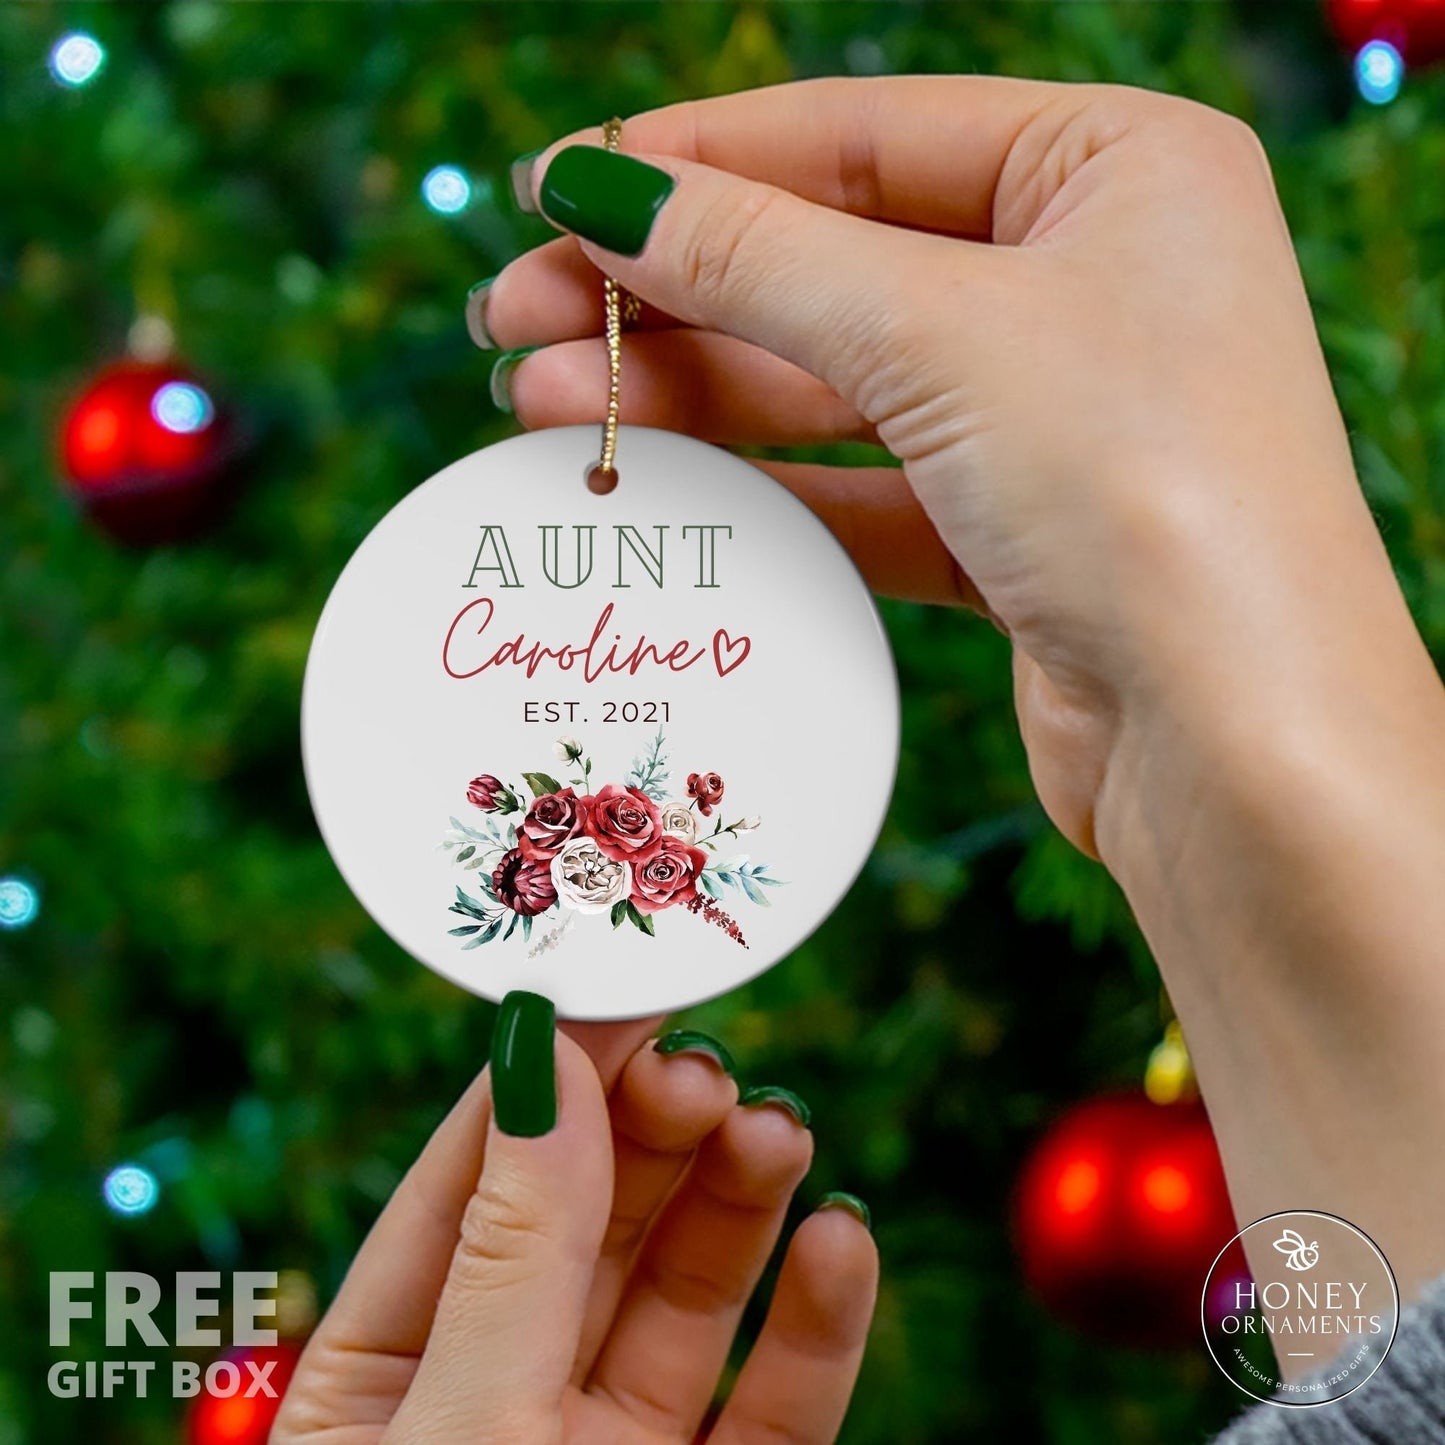 Personalized Aunt Ornament, New Aunt Gift, Pregnancy Announcement, Future Aunt Gifts, New Baby Announcement, Custom Christmas Ornaments